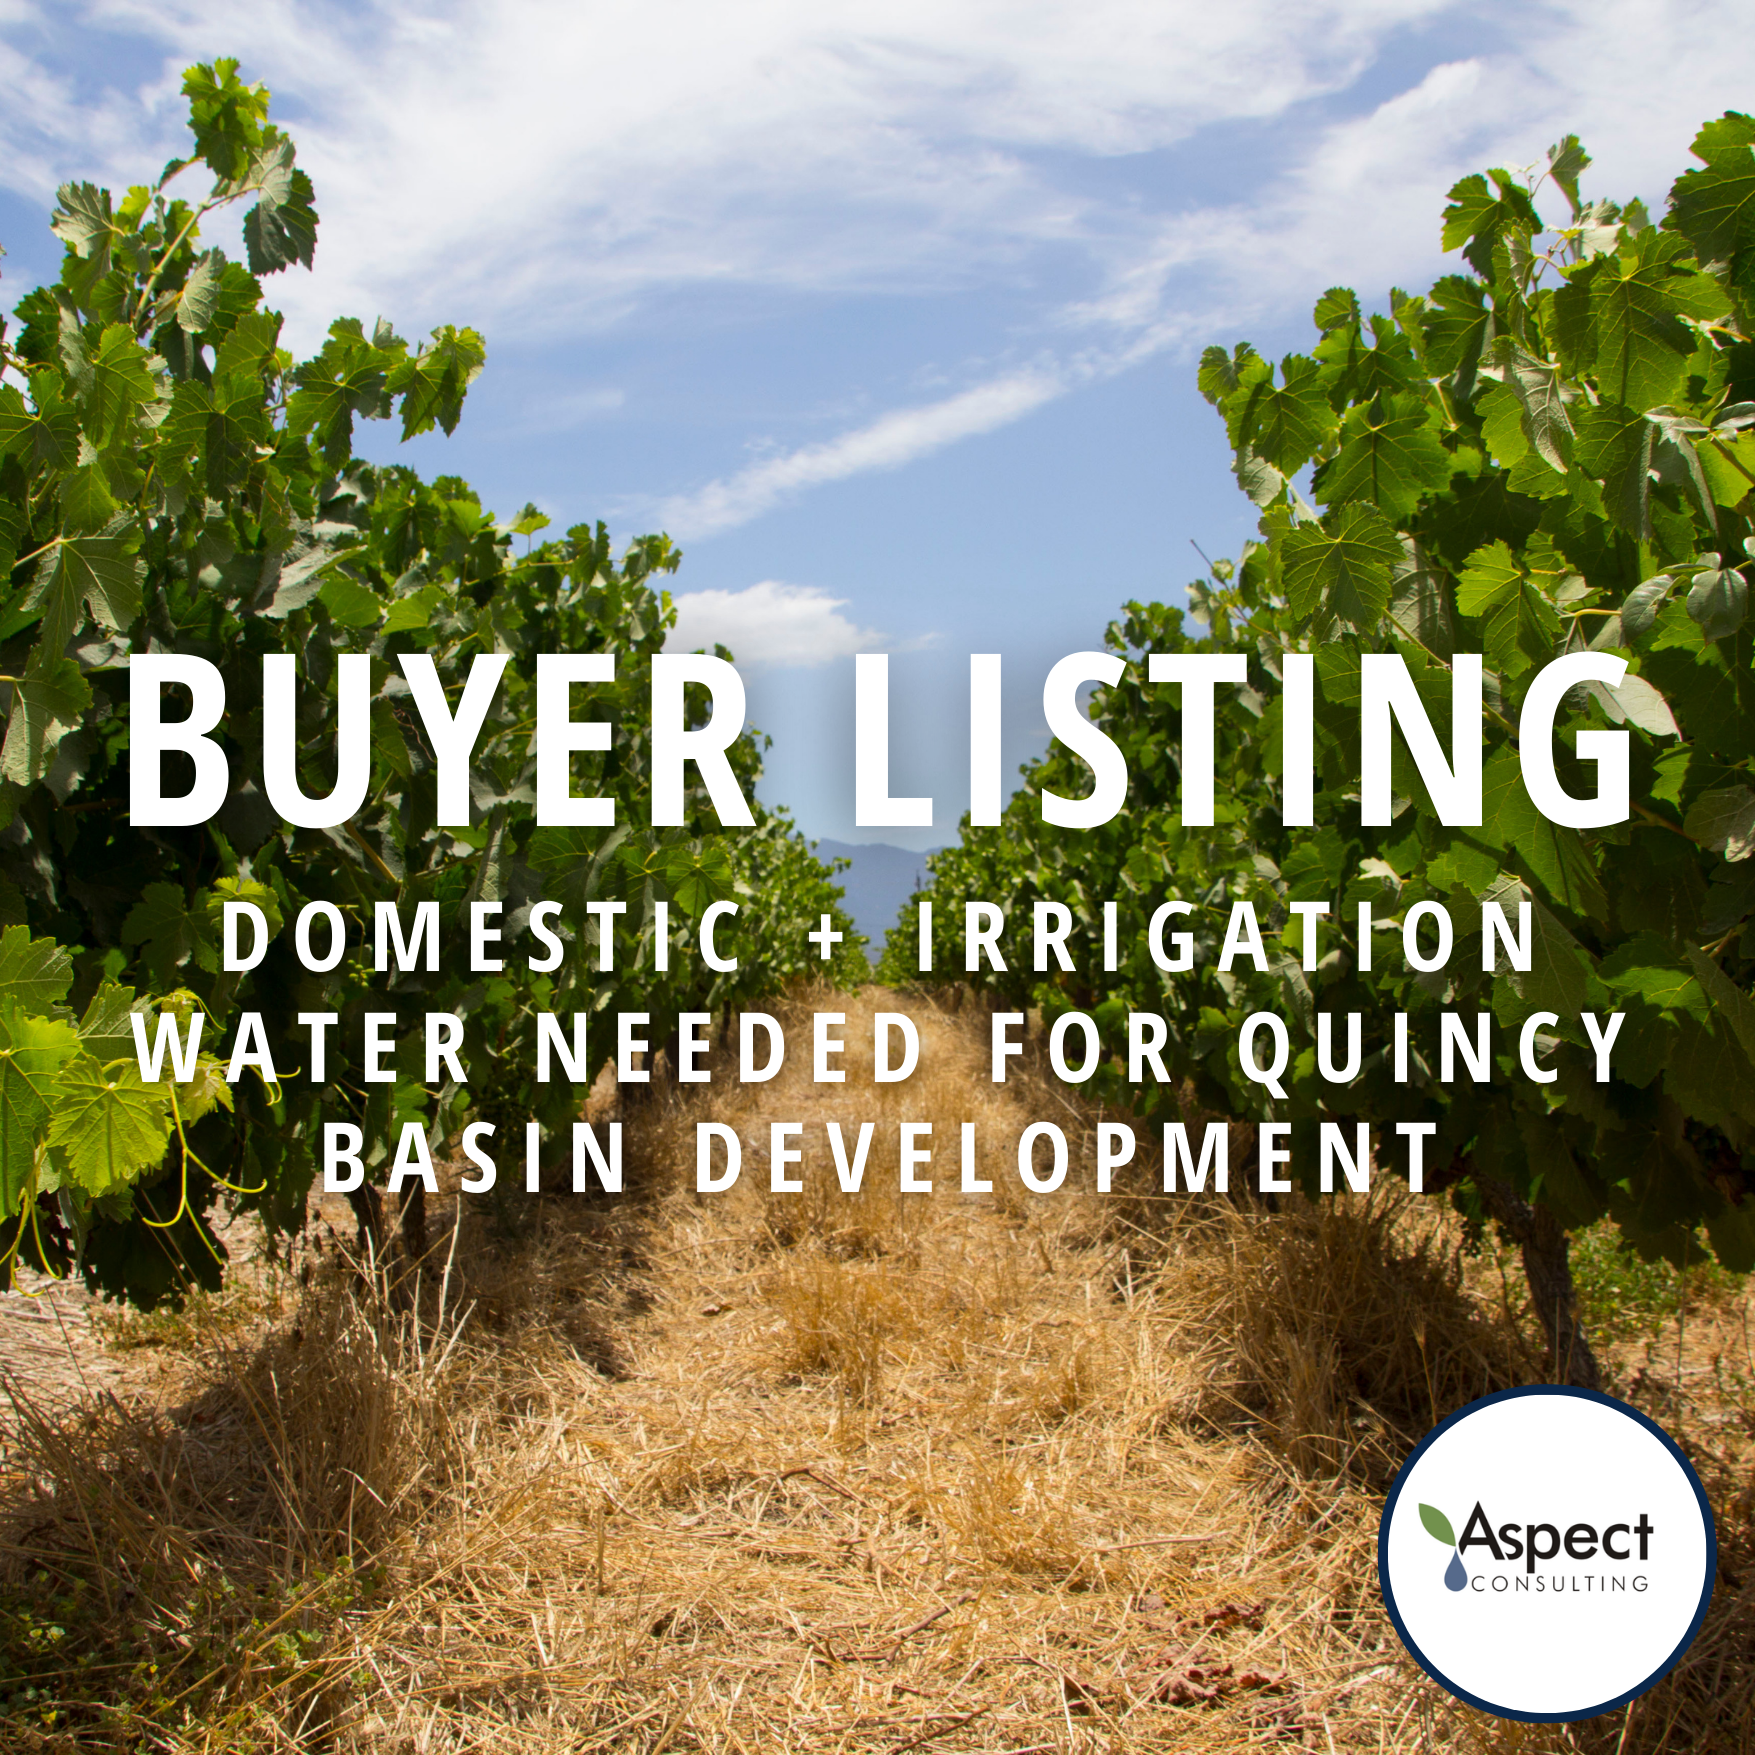 Domestic + Irrigation water needed for Quincy Basin development - Aspect Consulting